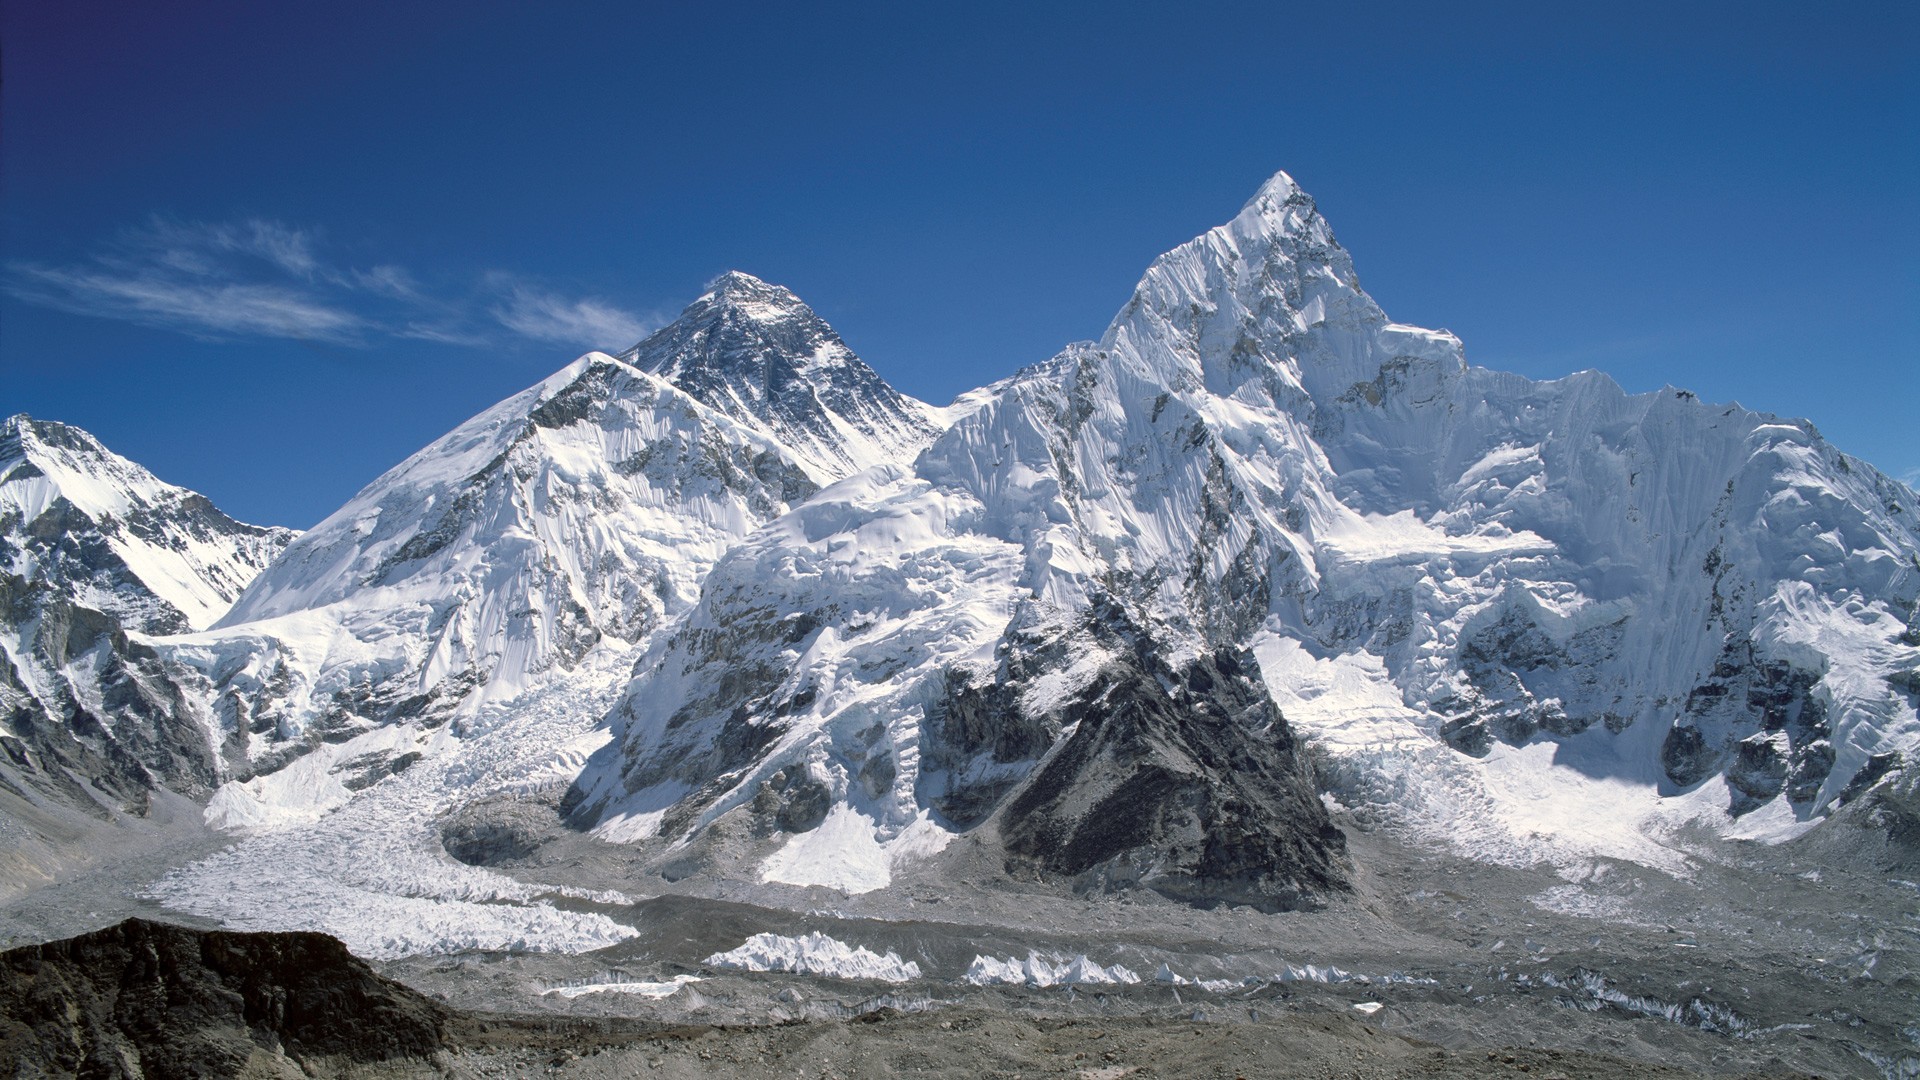 Mt Everest witnesses highest number of climbers in seven decades